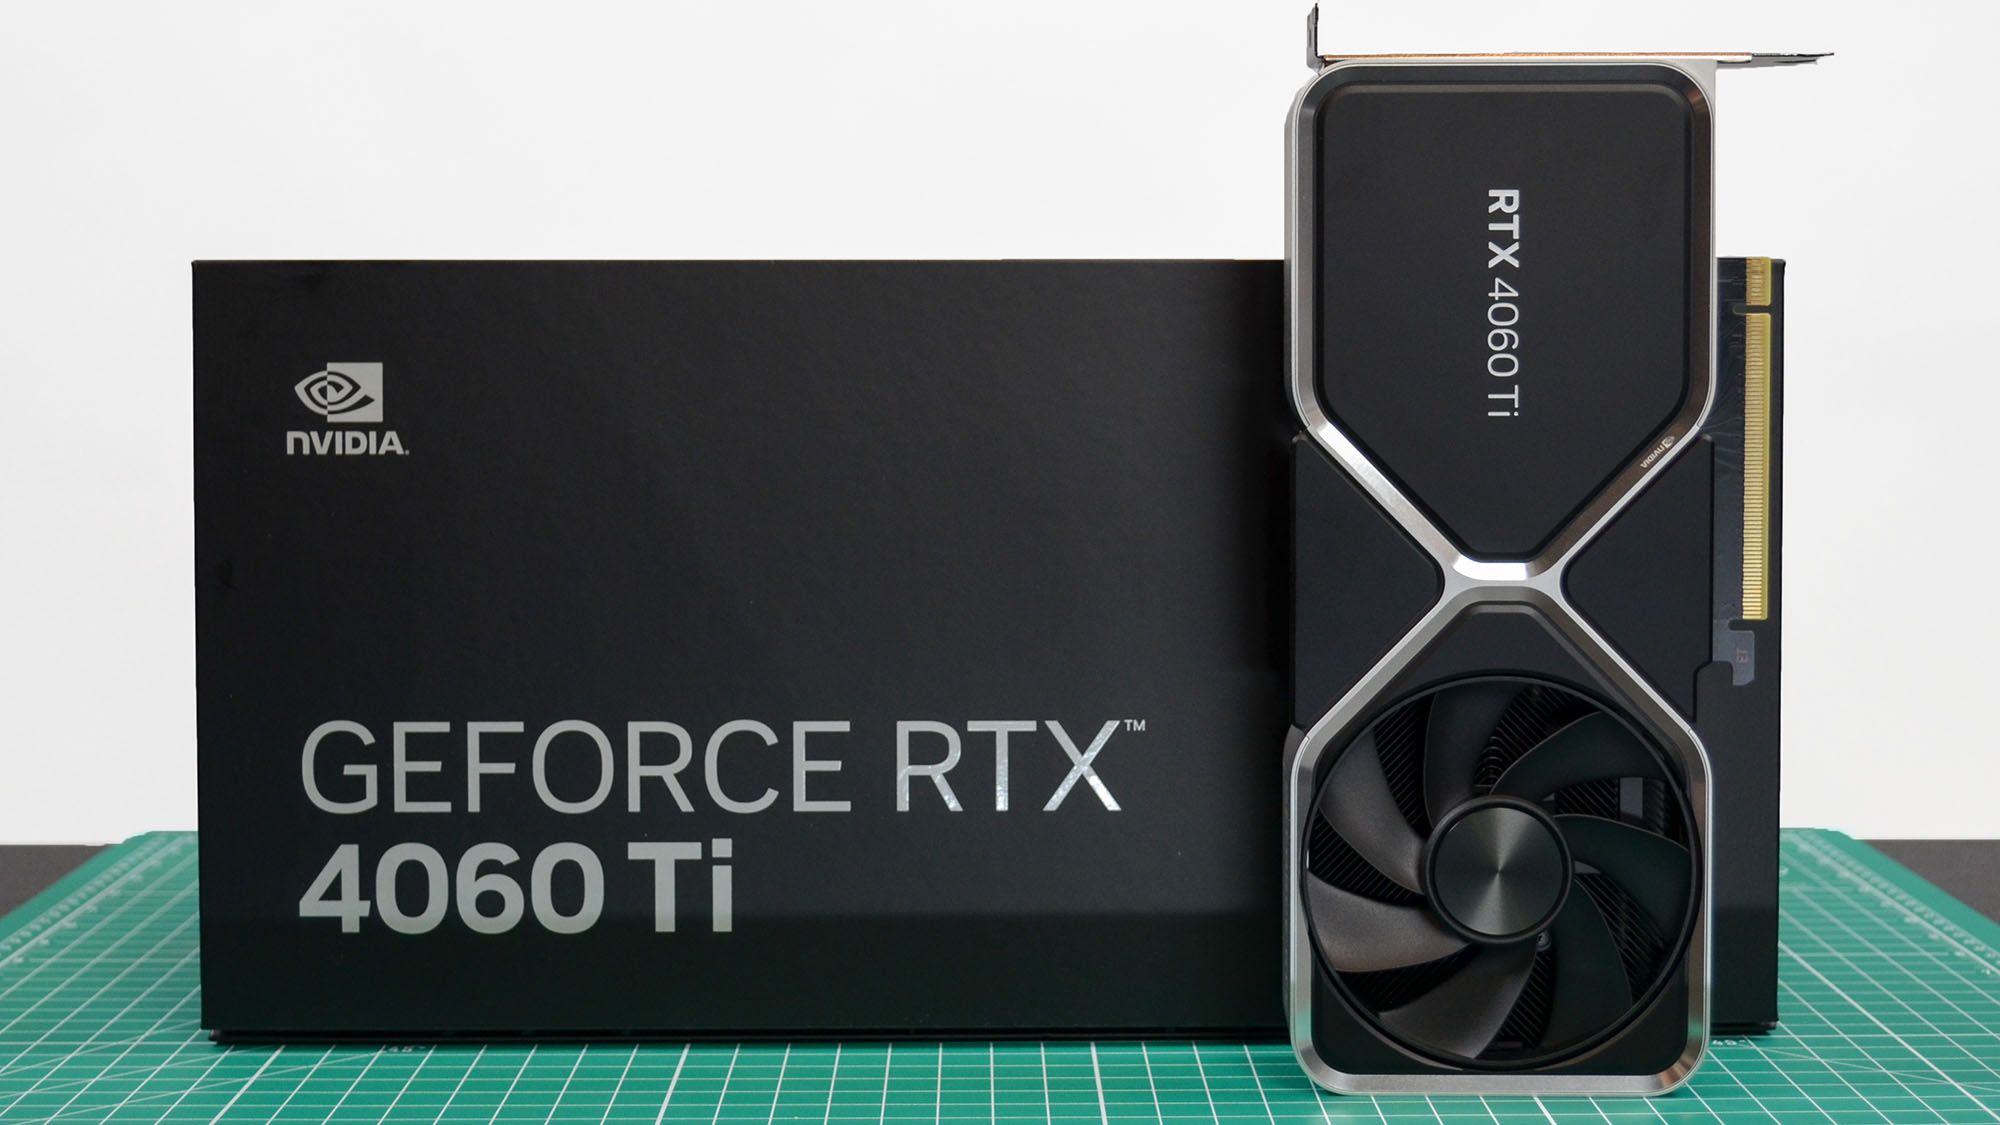 Nvidia GeForce RTX 3060 vs Nvidia GeForce RTX 4060: What is the